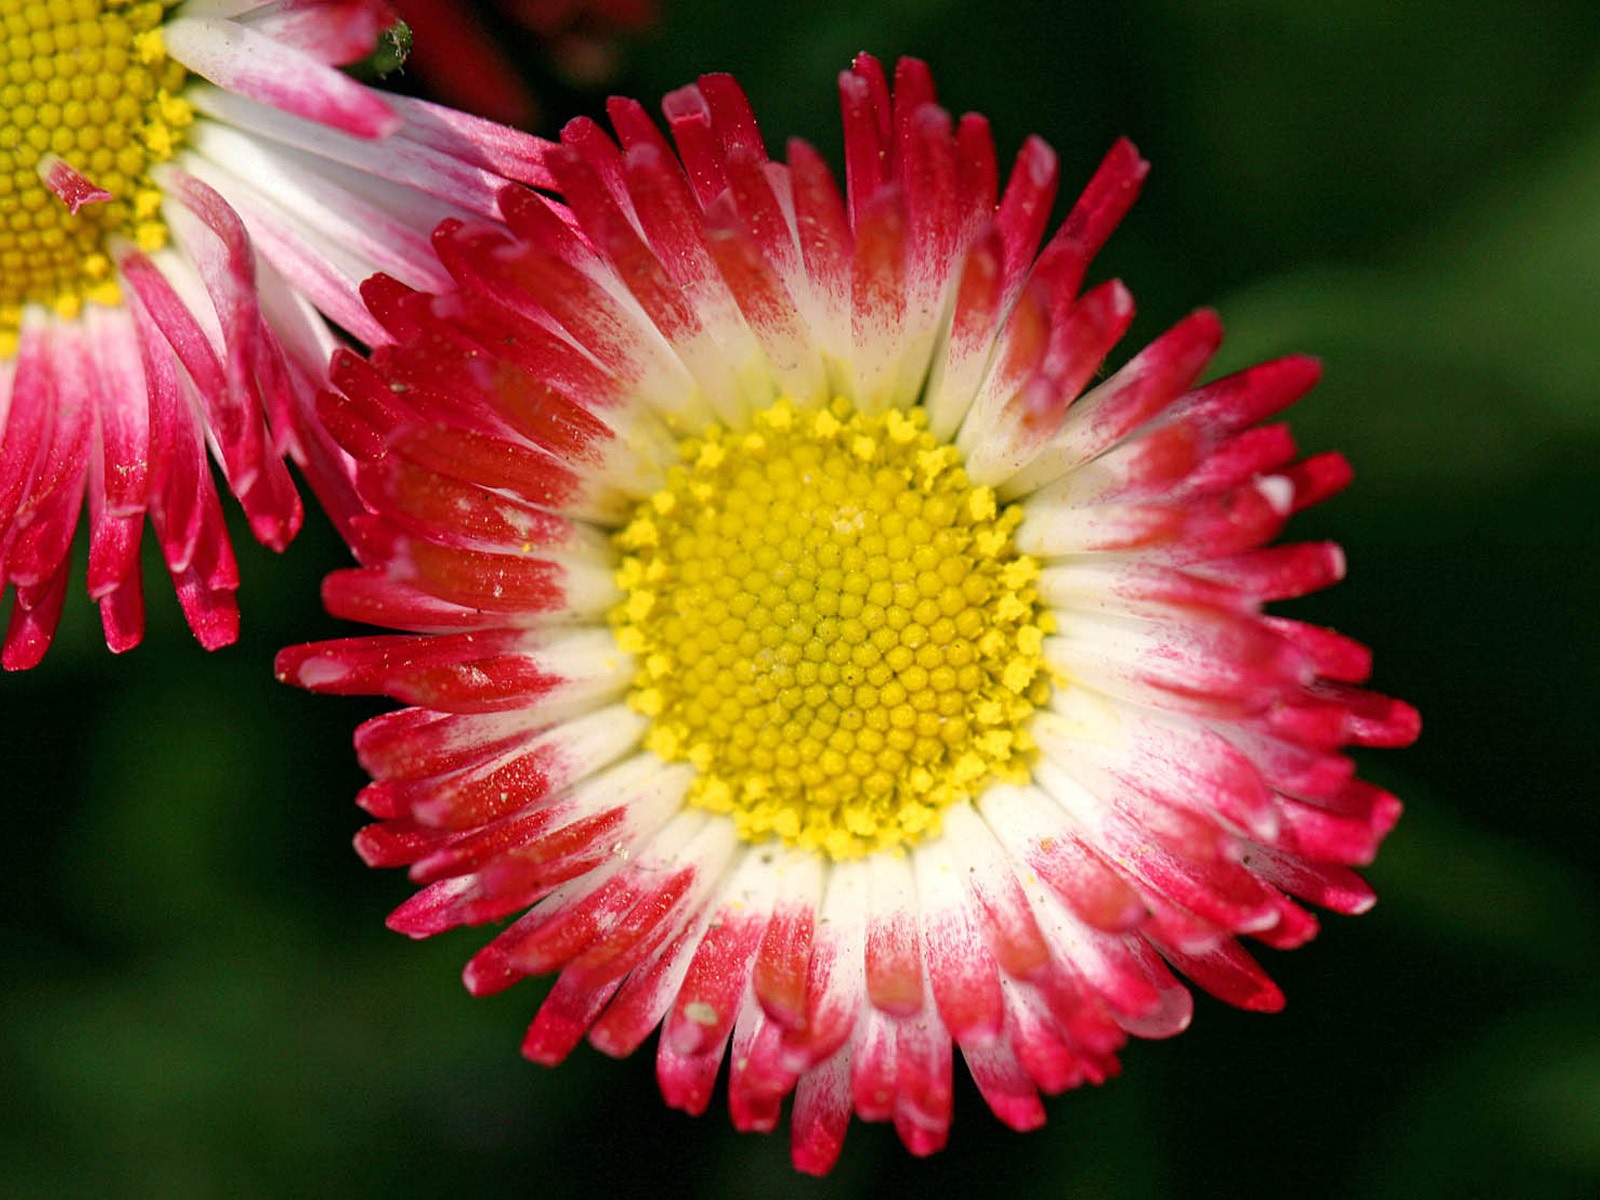 Daisies flowers close-up HD wallpapers #6 - 1600x1200